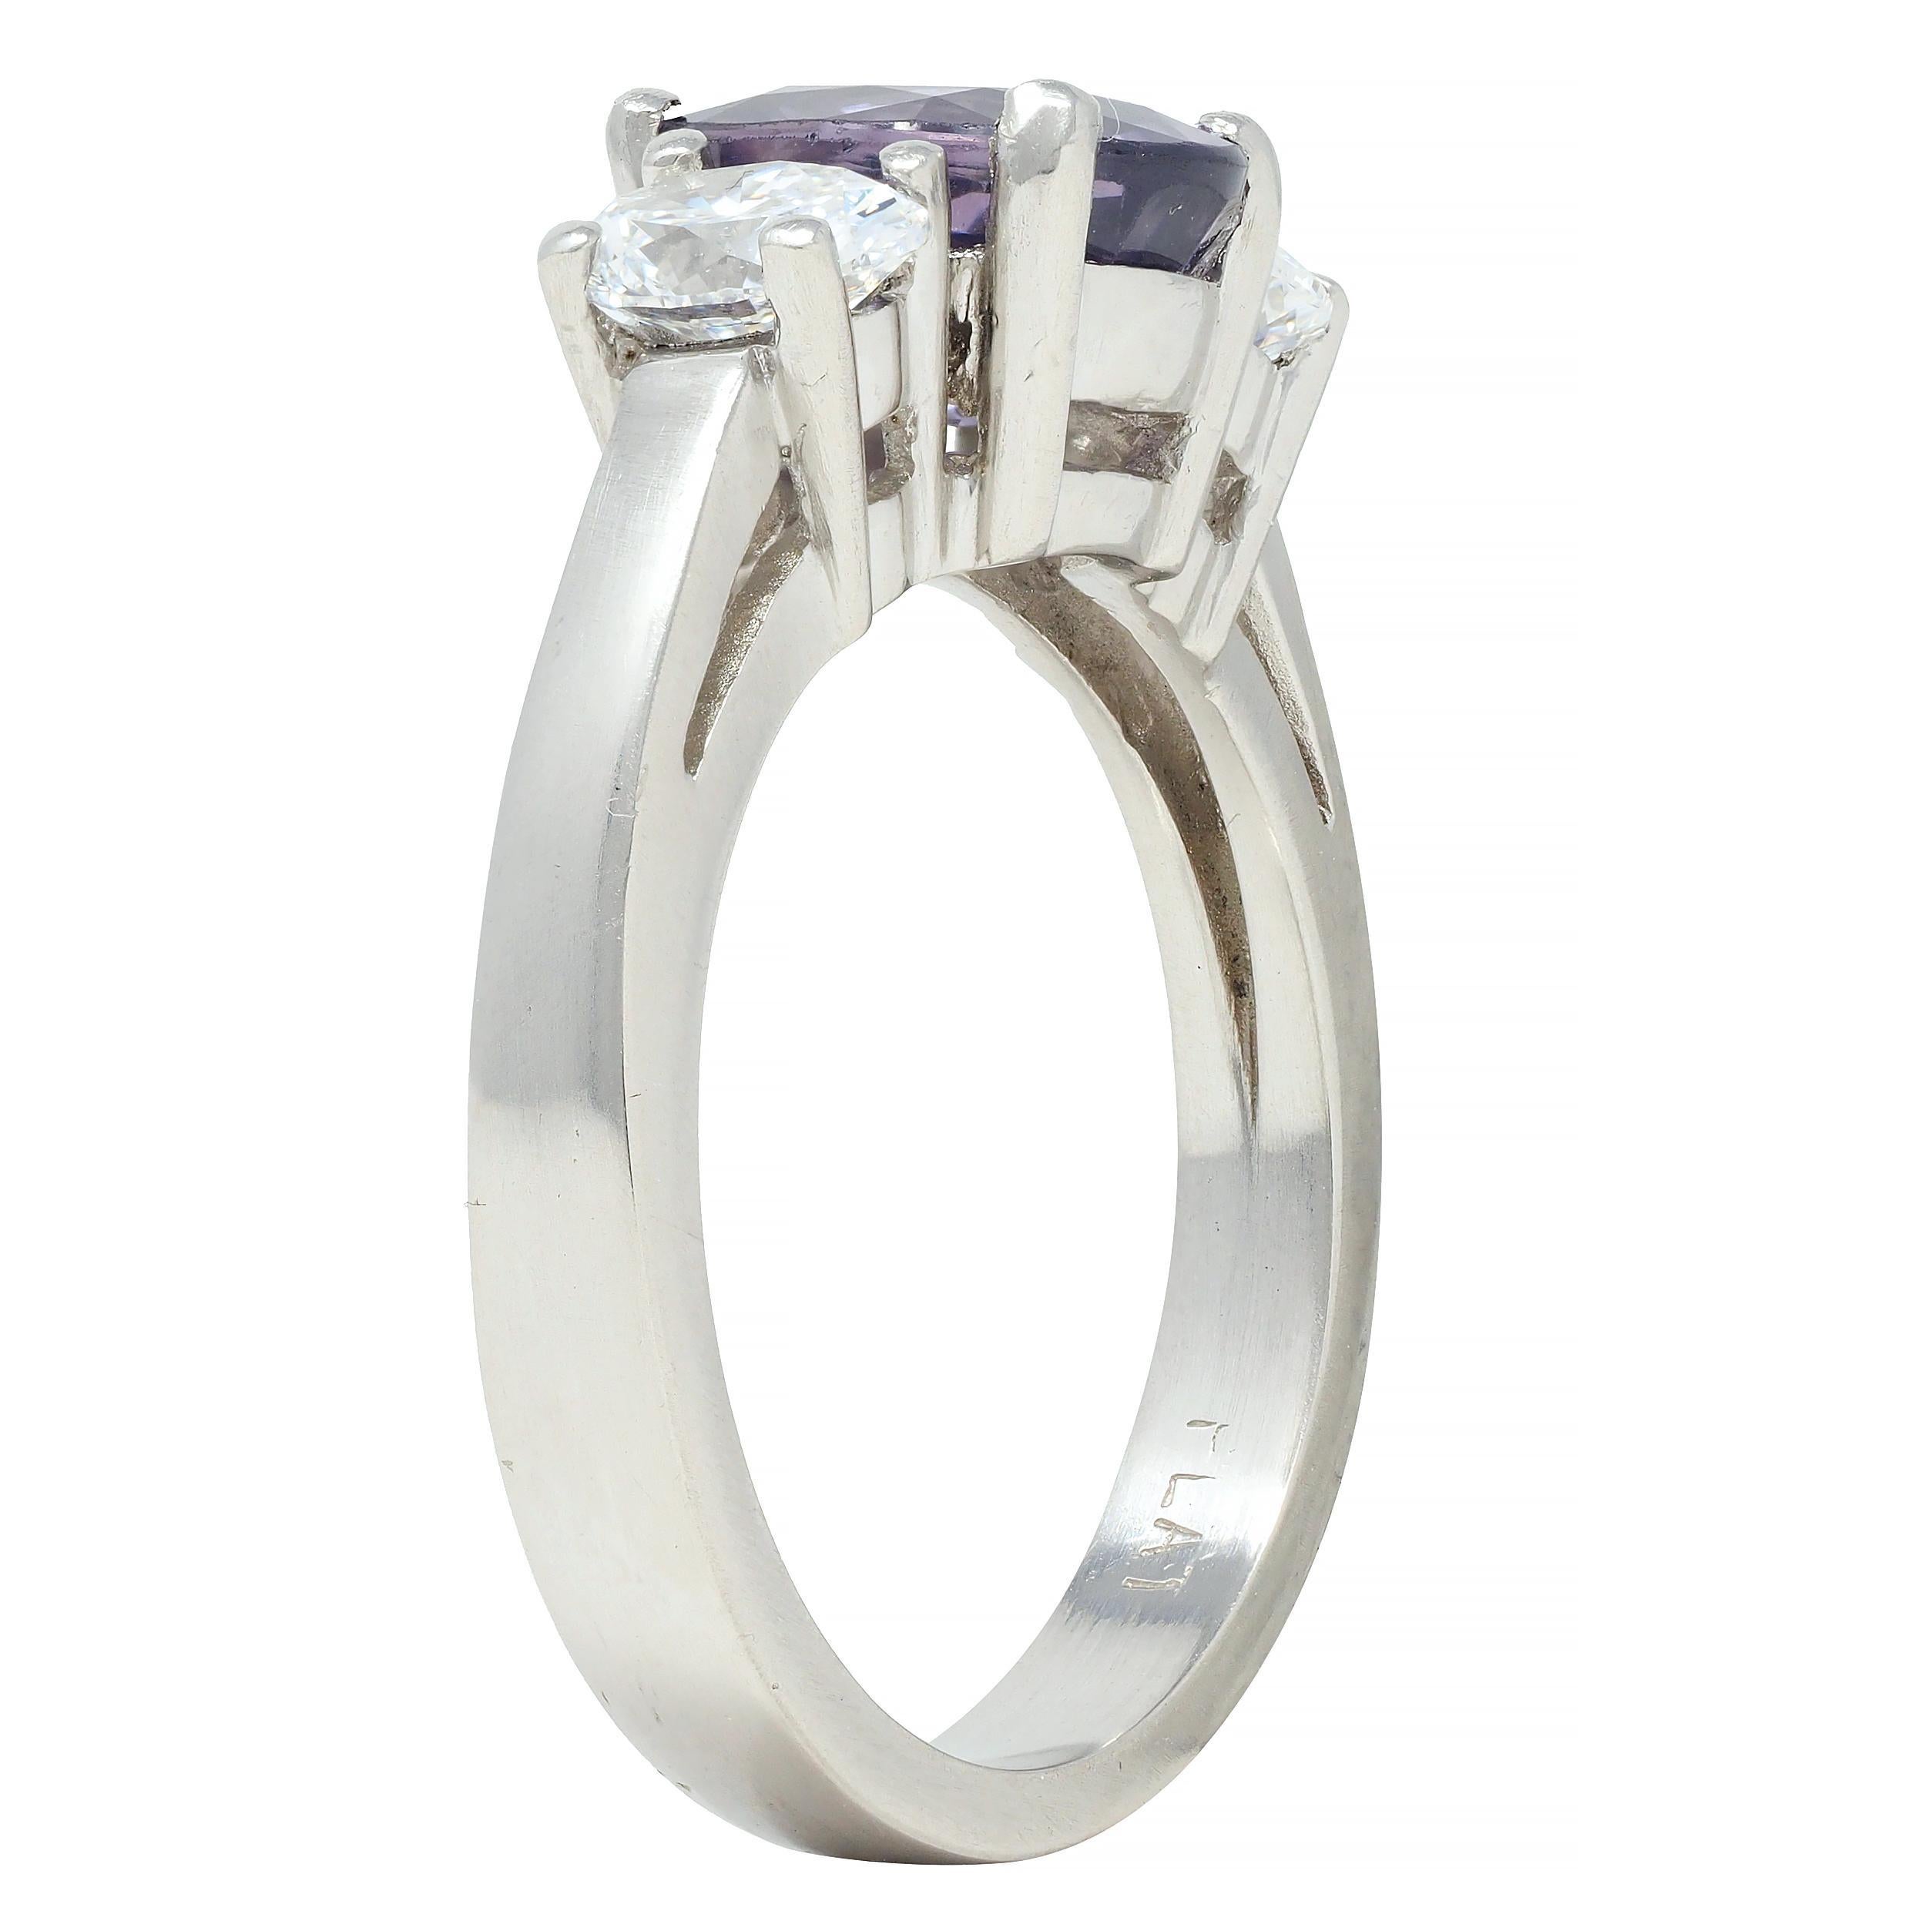 Centering an oval cut spinel weighing approximately 1.92 carats total - transparent medium pinkish purple 
Prong set in basket and flanked by oval cut diamonds 
Weighing approximately 0.86 carat total - G color with VS2 clarity
Prong set in basket